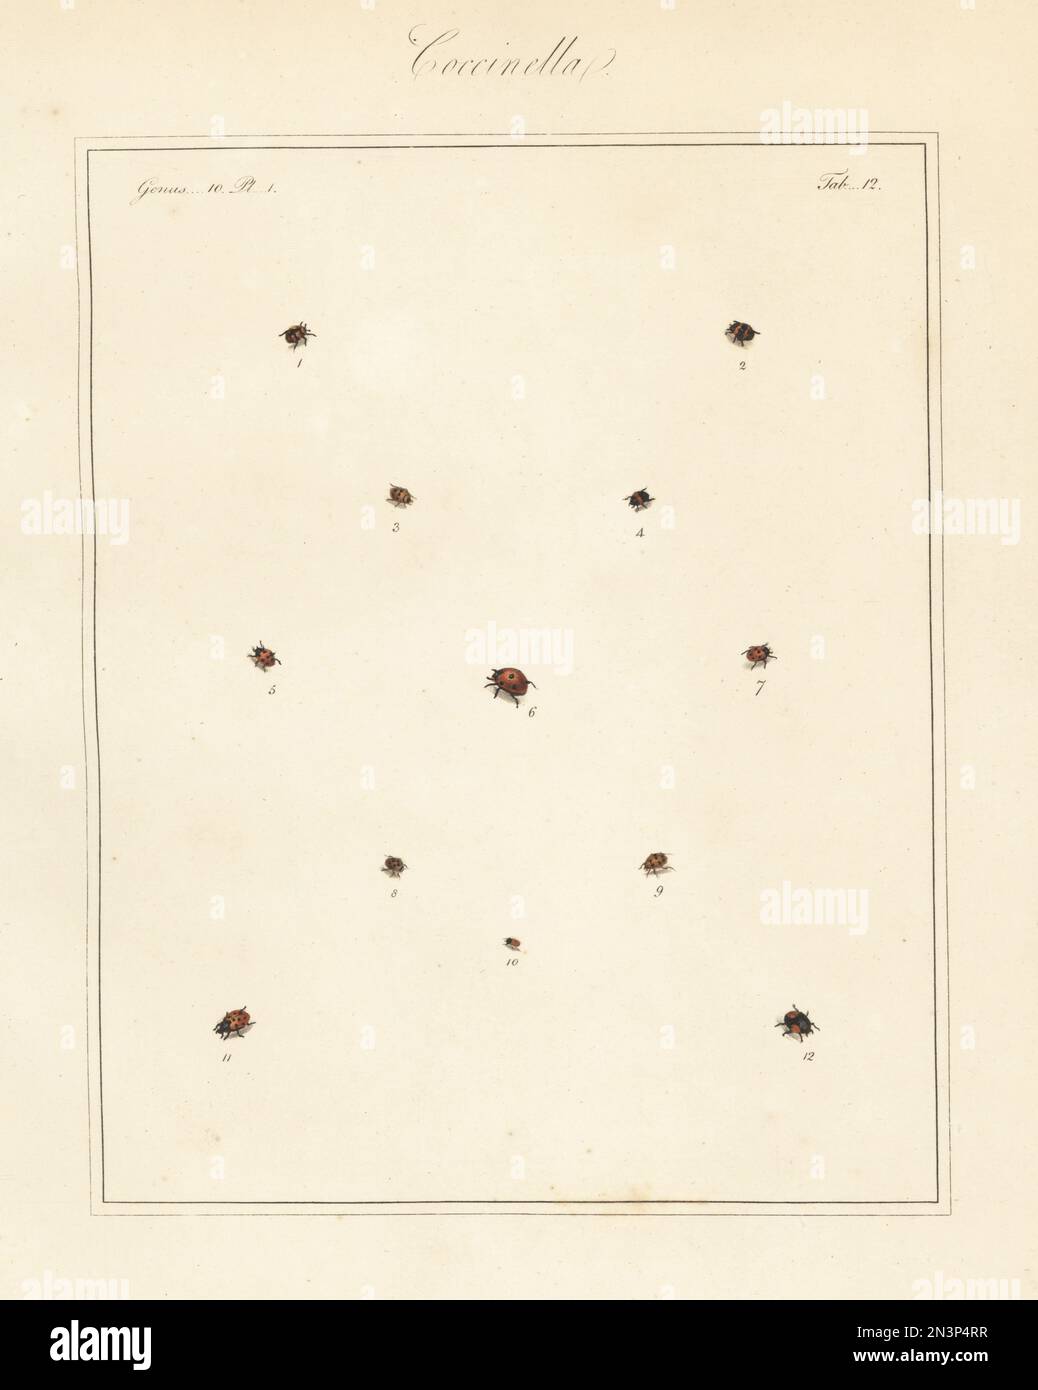 Species of ladybirds or ladybugs. Ten-spotted ladybird, Adalia decempunctata 1,2, 11-spotted ladybird, Coccinella undecimpunctata 3,5,7, kidney-spot ladybird, Chilocorus renipustulatus 4, seven-spot, Coccinella septempunctata 6, 24-spot, Subcoccinella vigintiquatuorpunctata 8, 13-spot, Hippodamia tredecimpunctata 9, water scavenger, Cercyon unipunctatus 10, and pine ladybird, Exochomus quadripustulatus 12. Handcoloured copperplate engraving from Thomas Martyn’s The English Entomologist, Exhibiting all the Coleopterous Insects found in England, Academy for Illustrating and Painting Natural Hist Stock Photo